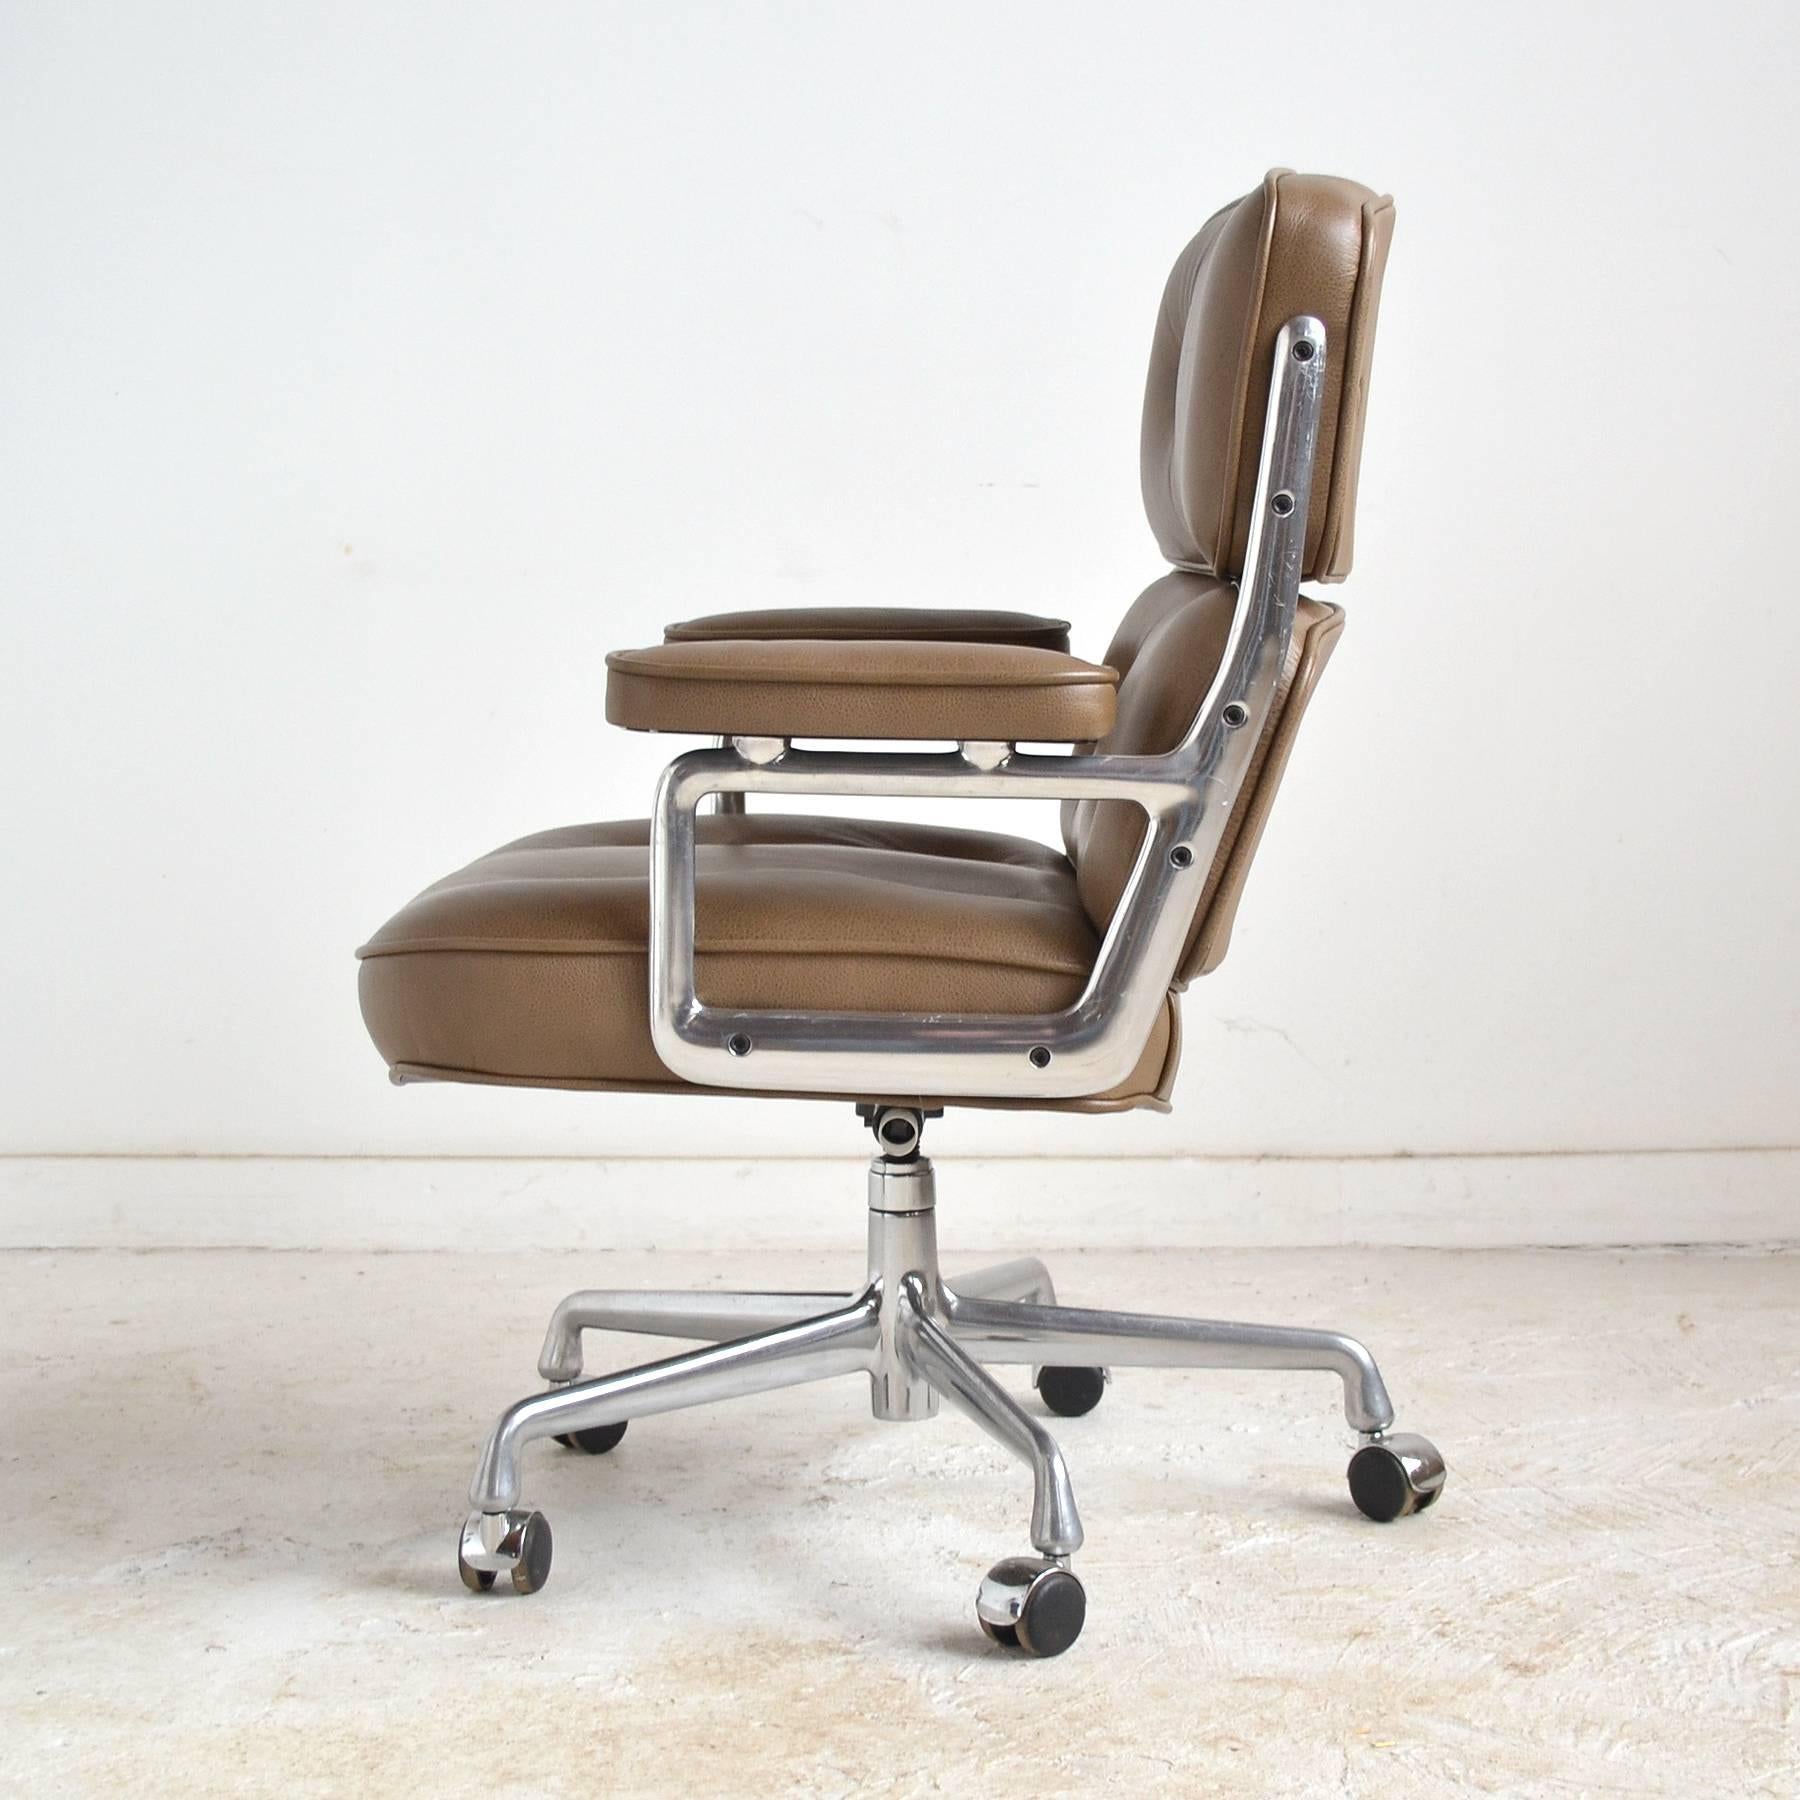 Late 20th Century Charles and Ray Eames Pair of Time-Life Chairs by Herman Miller